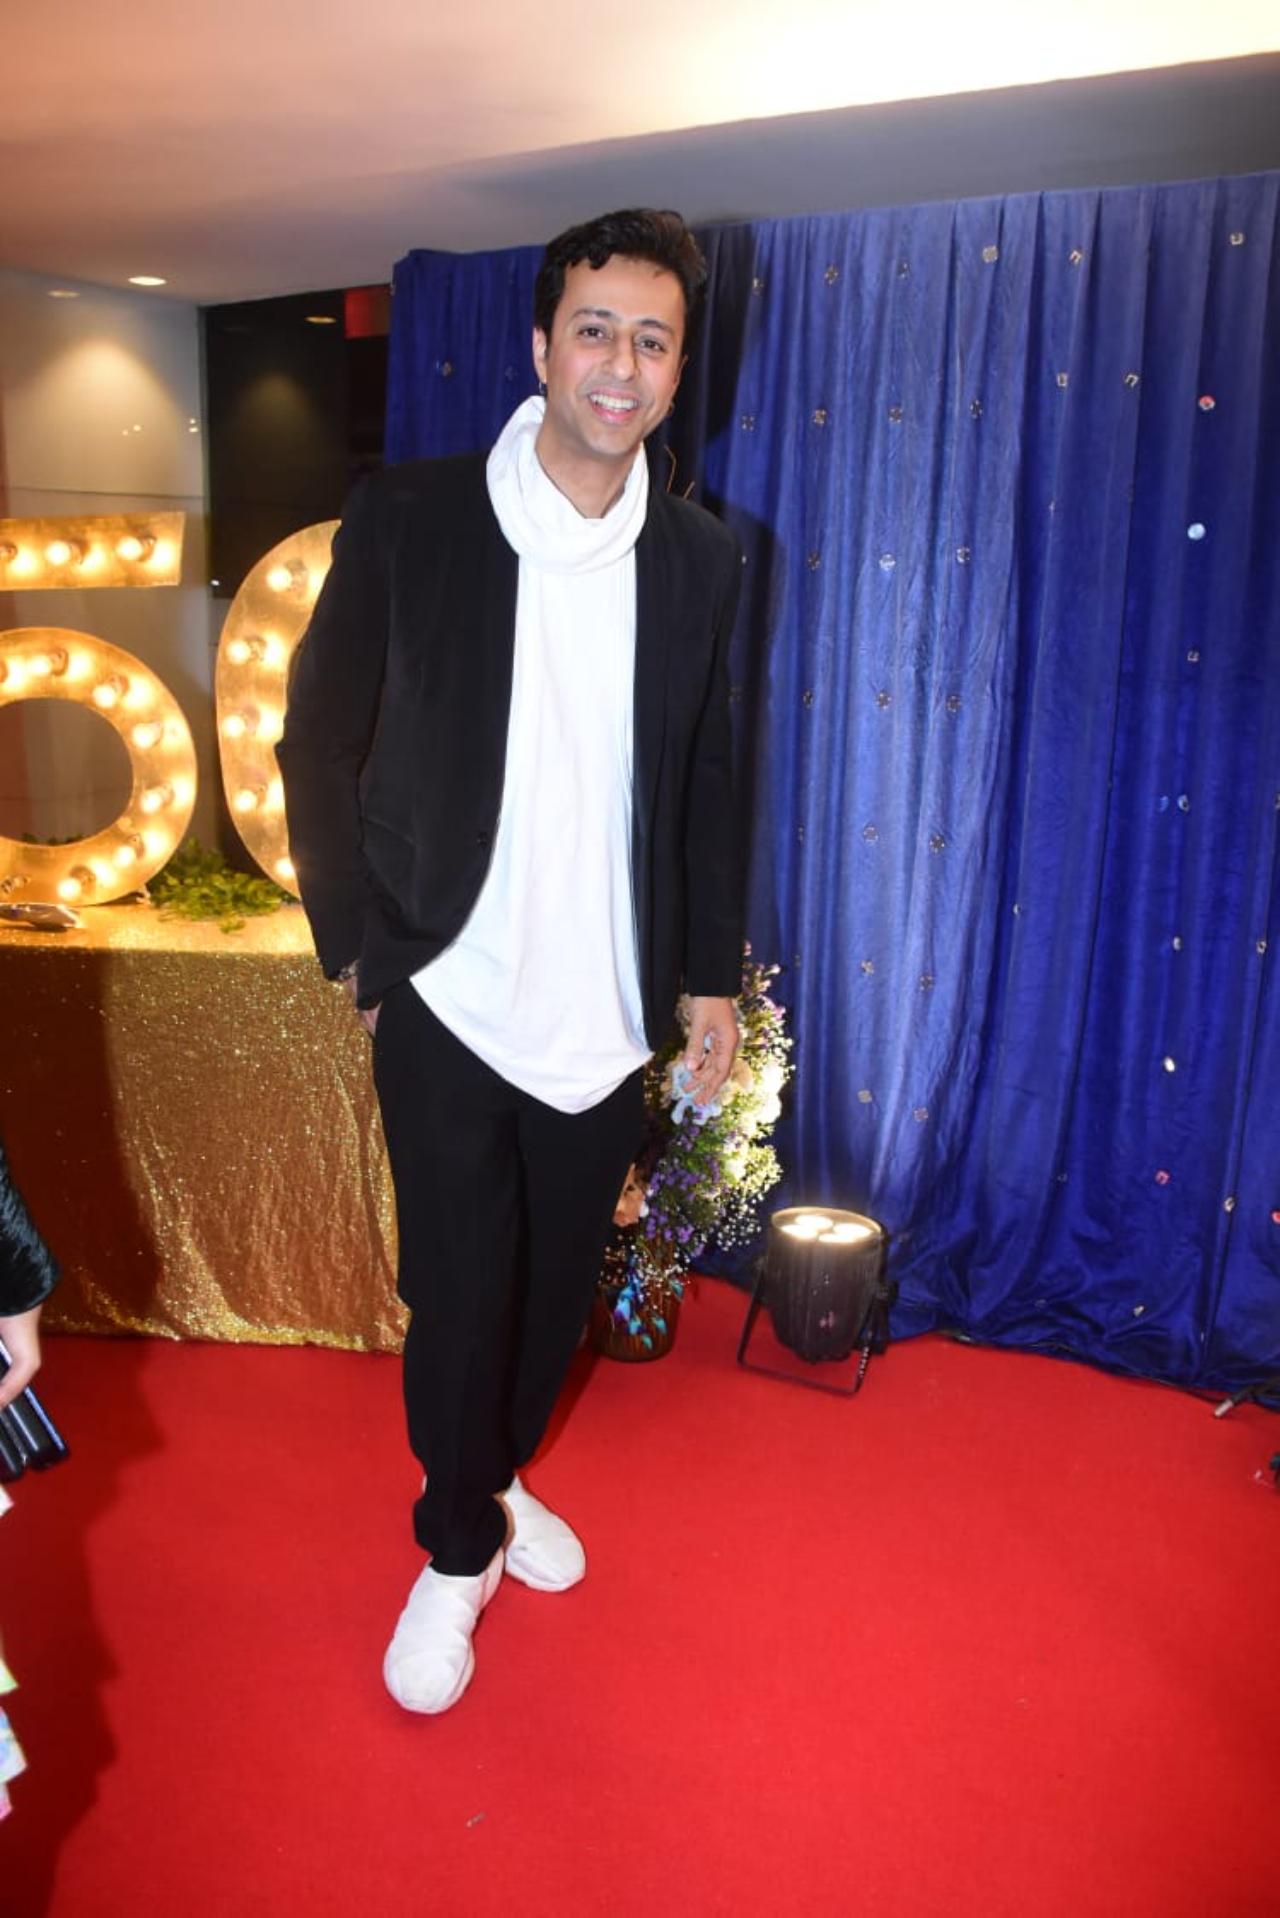 Several friends from the music industry attended the event to extend their best wishes to Sonu Nigam on his 50th birthday. Salim Merchant looked debonair as ever in his black and white outfit